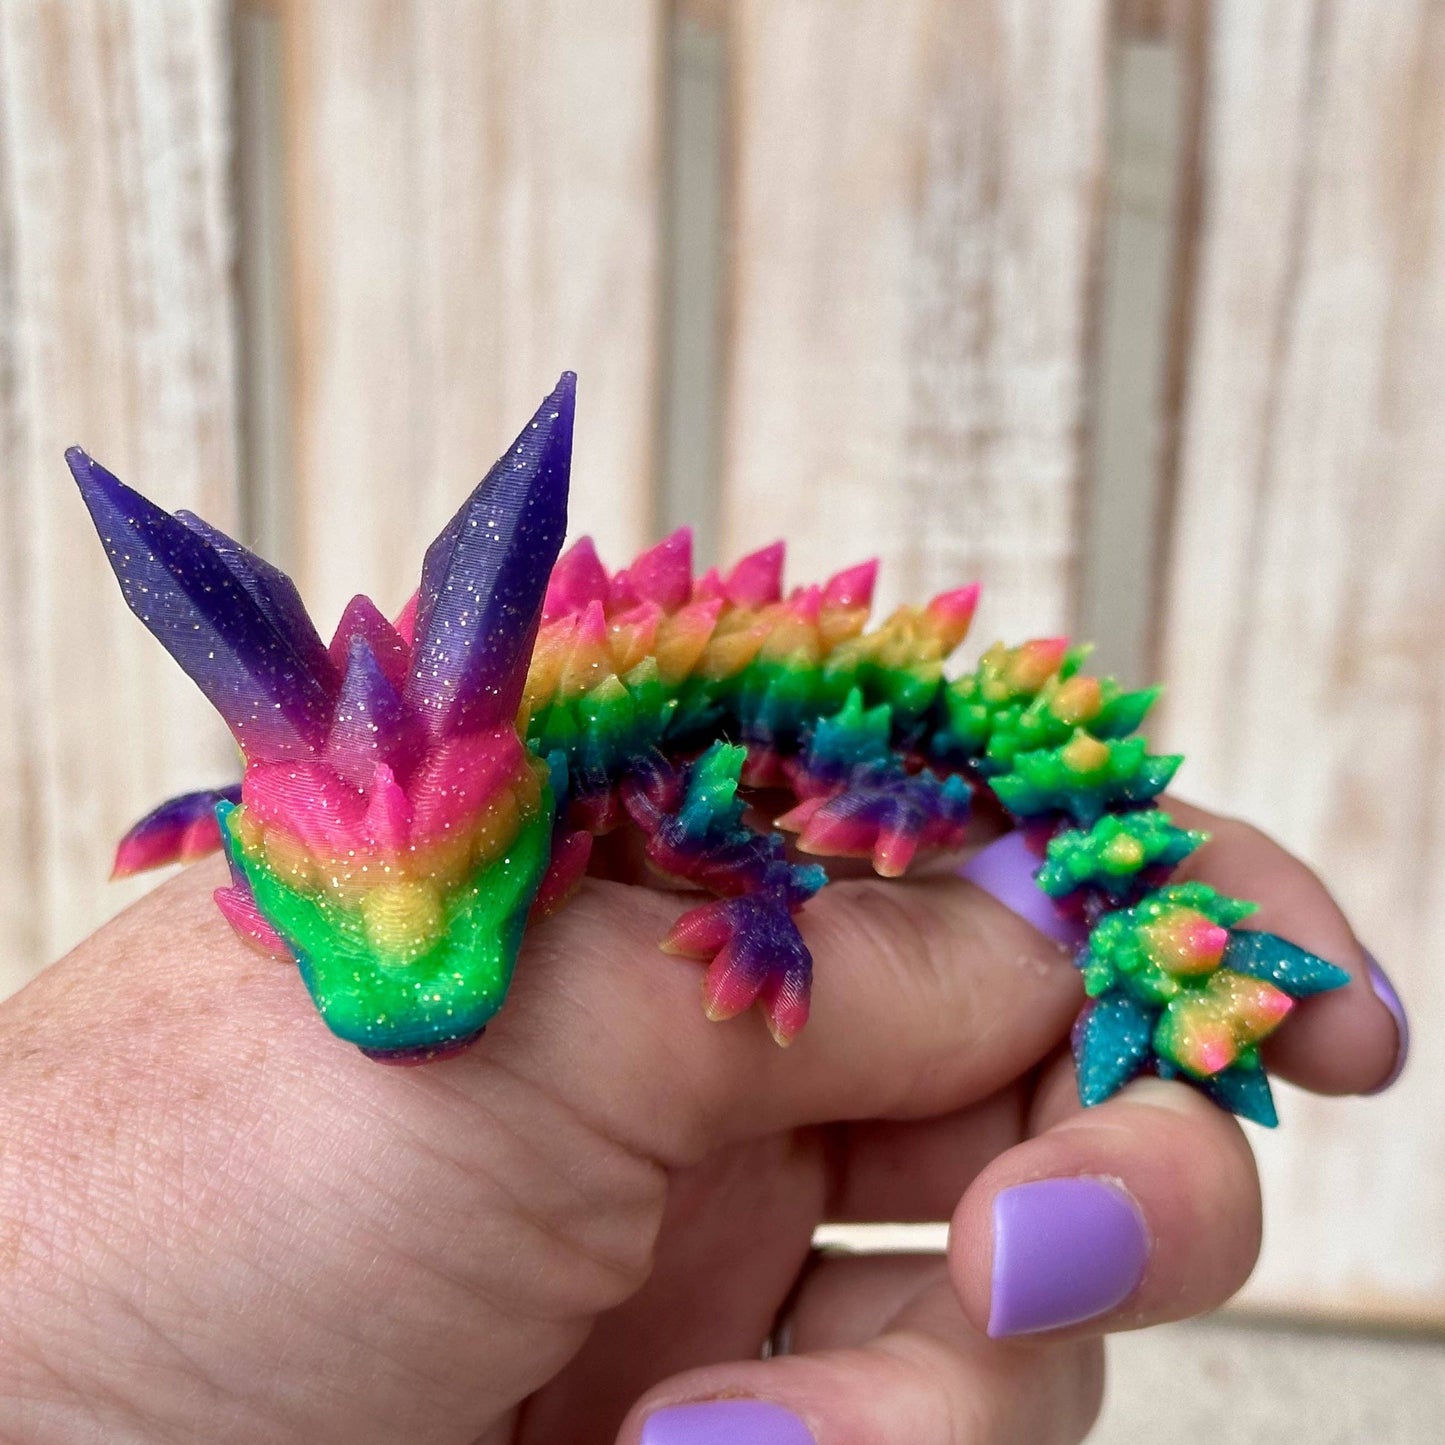 3D Printed Baby Crystal Dragon: Infant - 6"